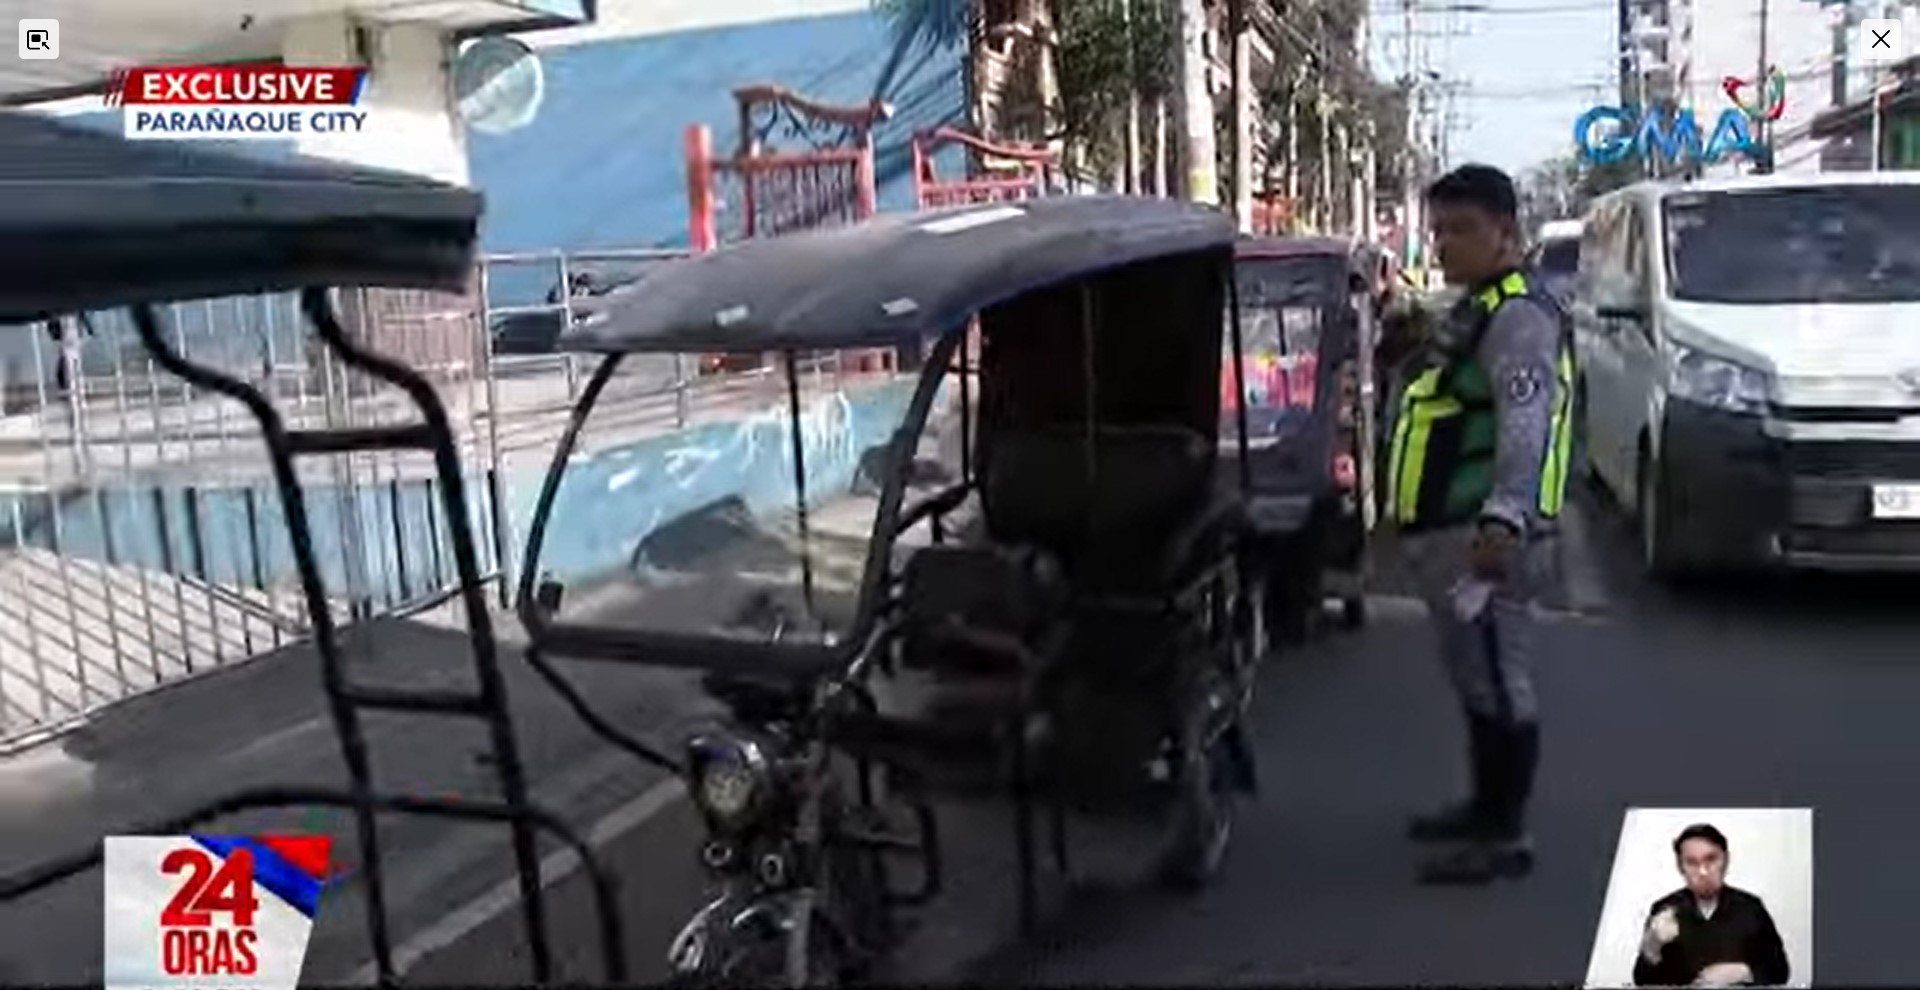 e-trikes, illegally-parked vehicles impounded in parañaque city